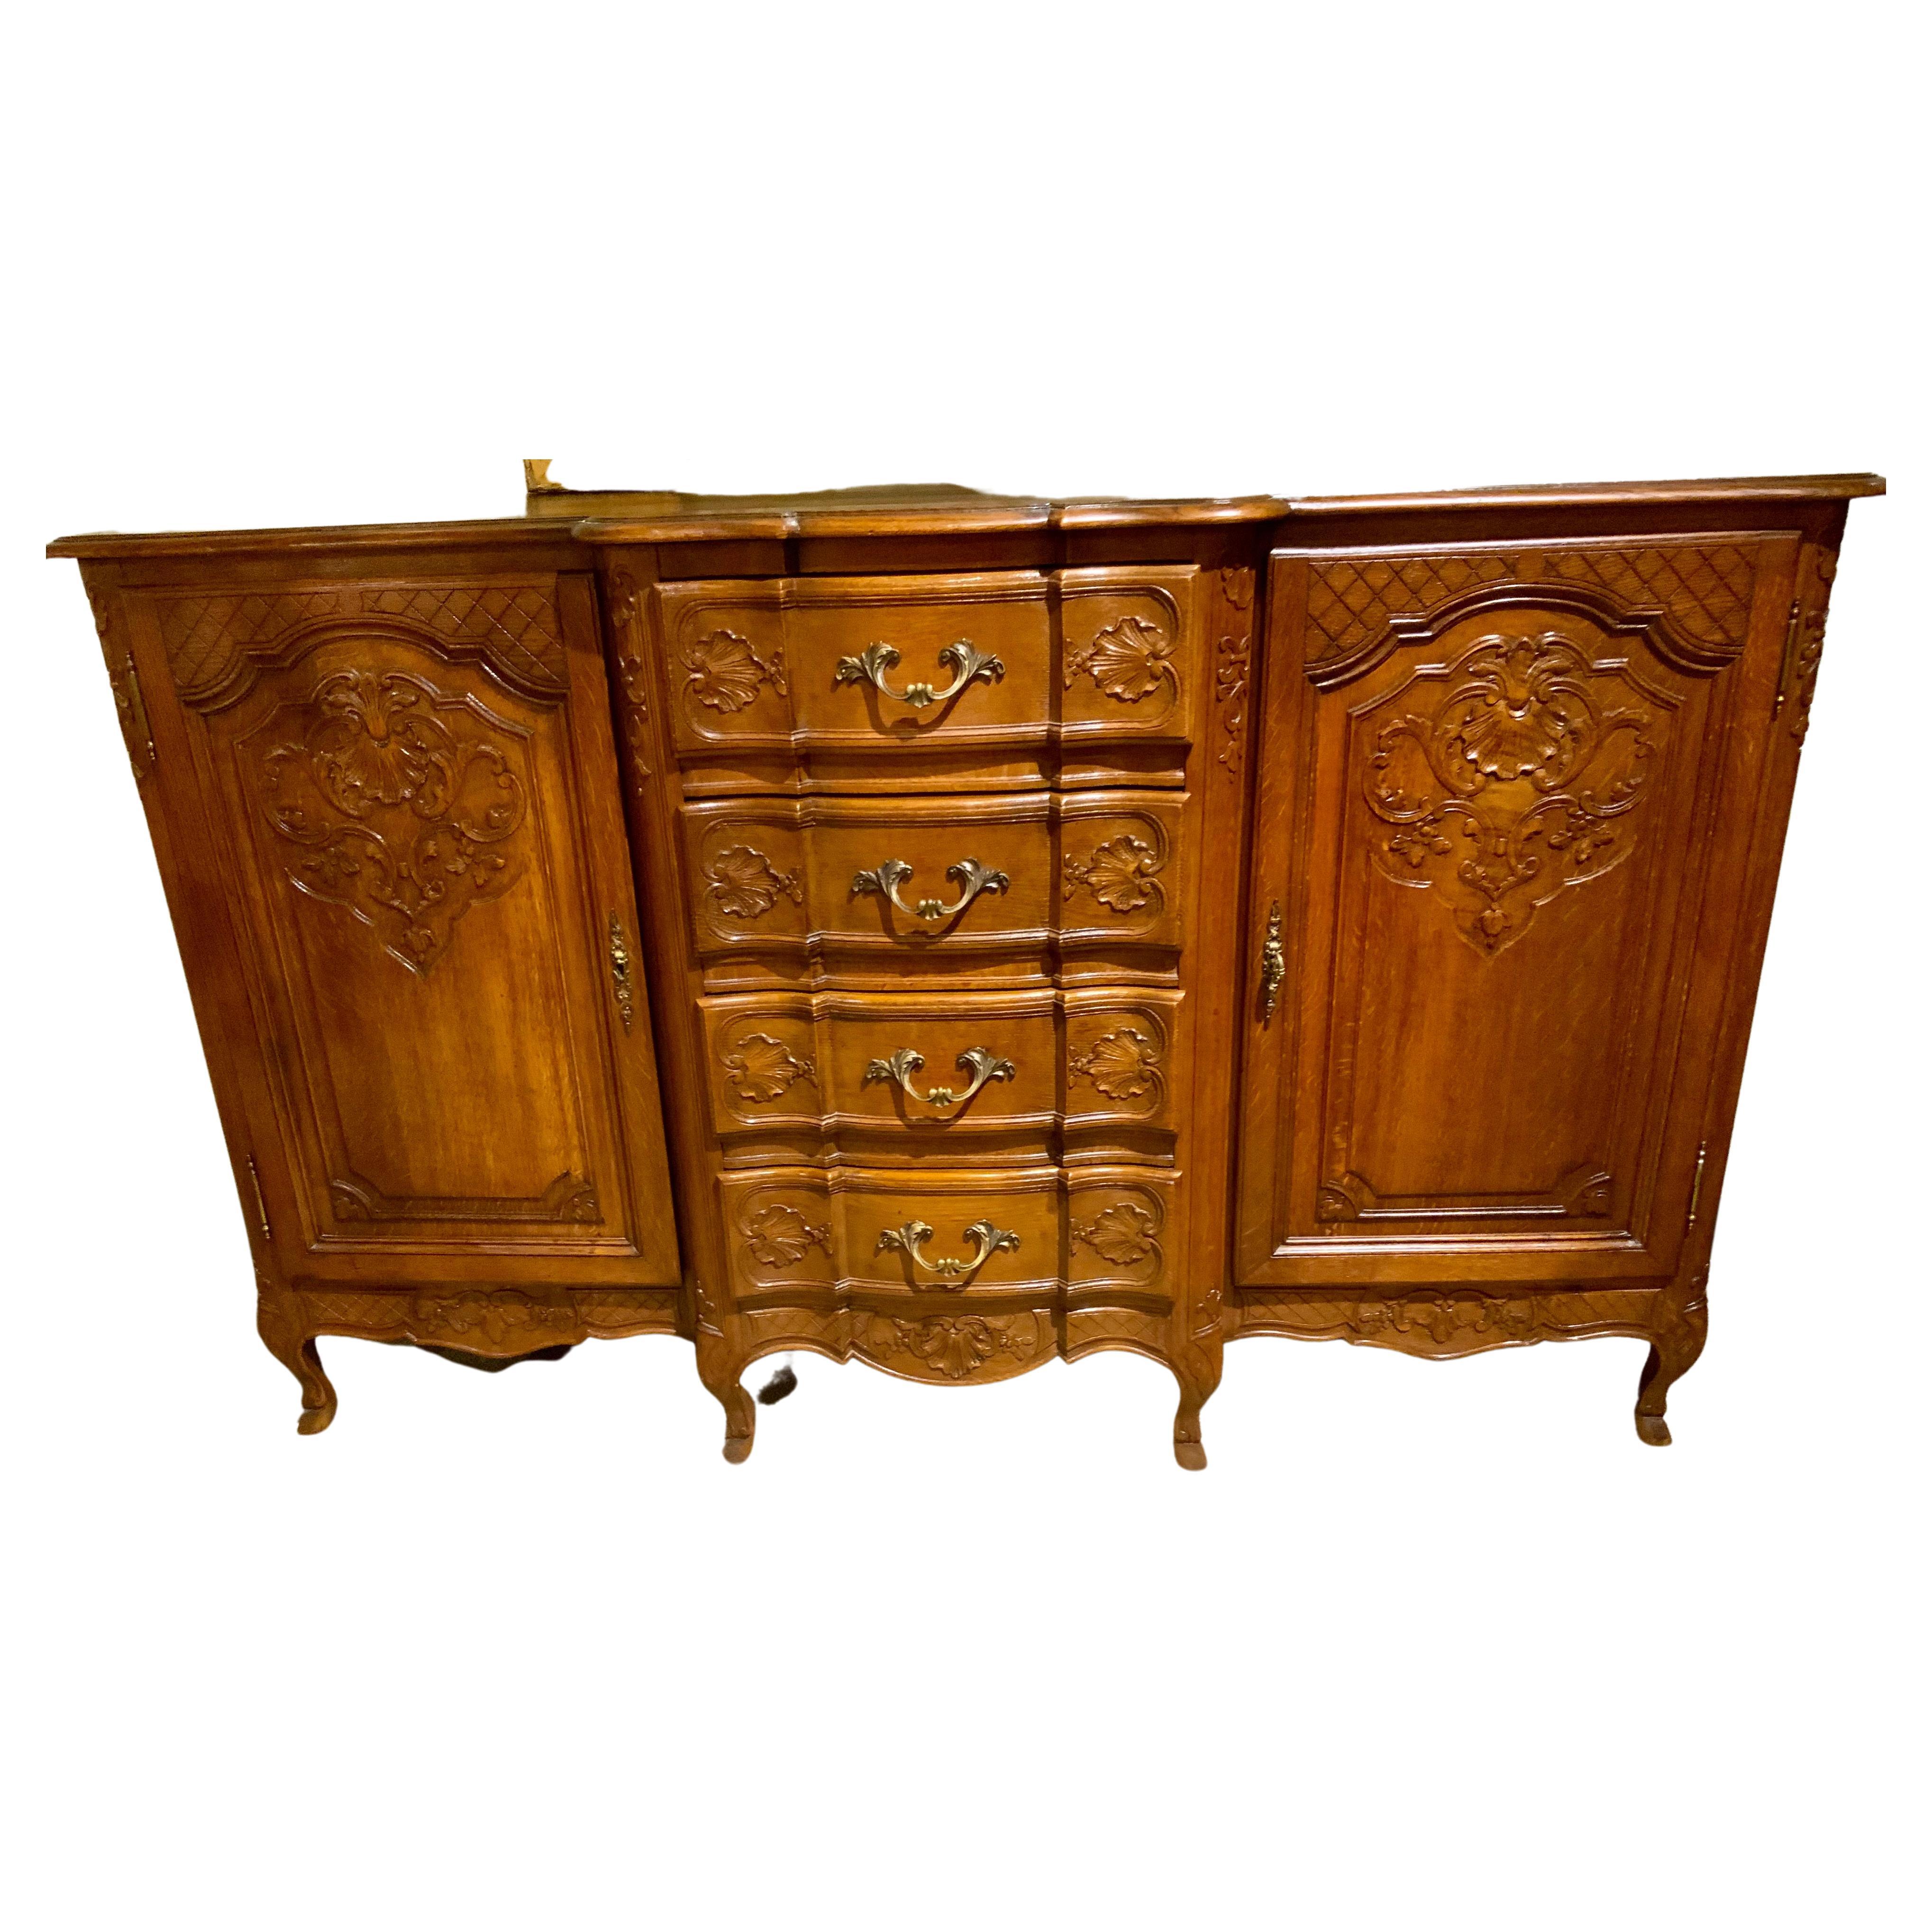 French country buffet/sideboard 19 th c in oa